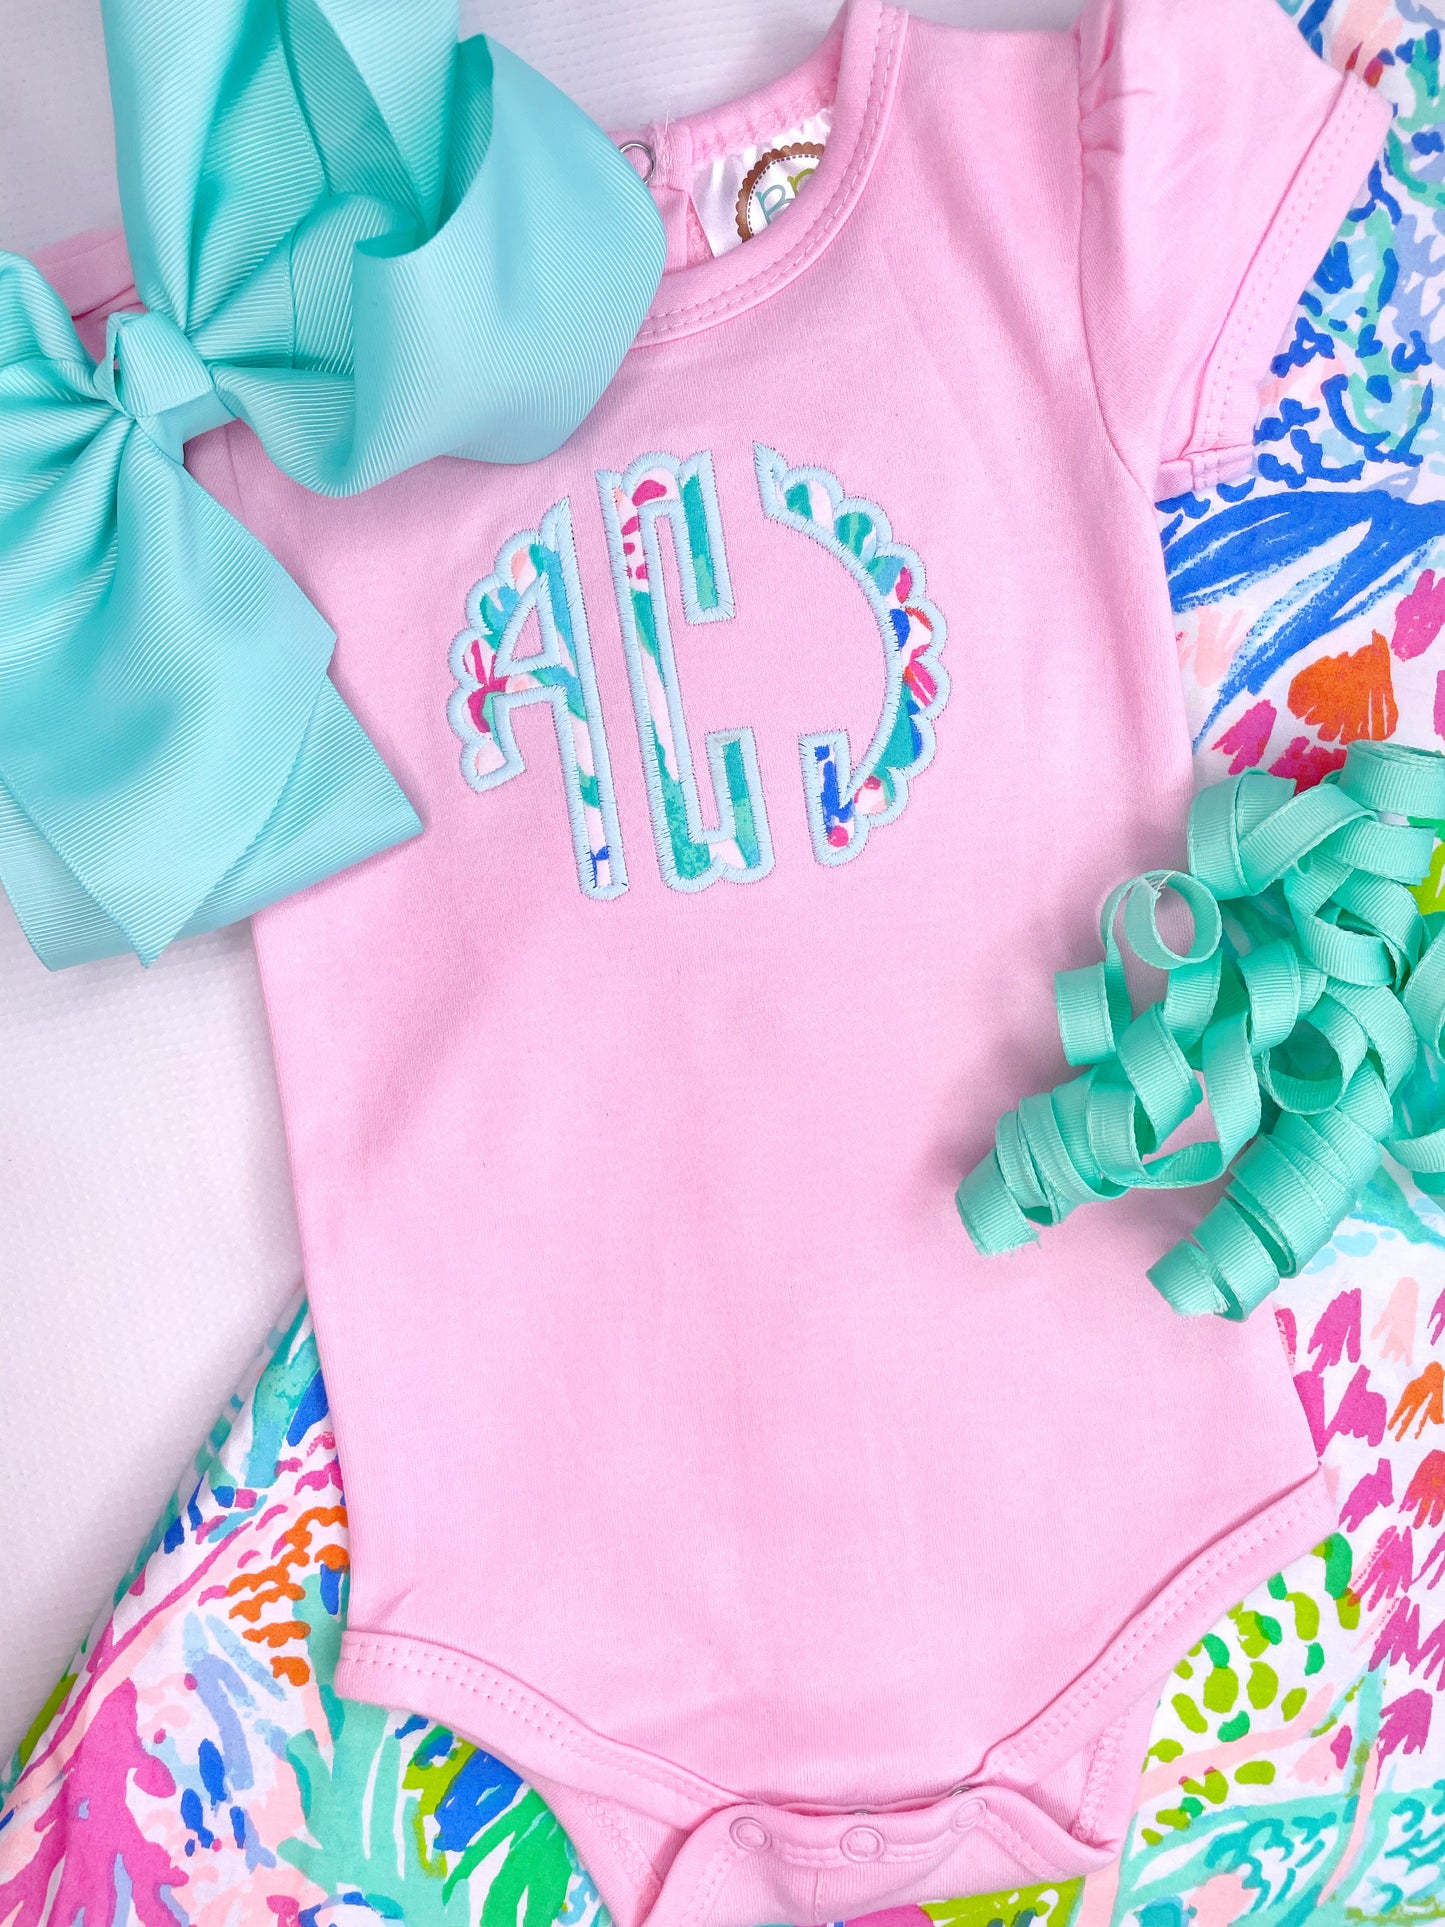 Scallop Monogram Onesie with Lily P fabric